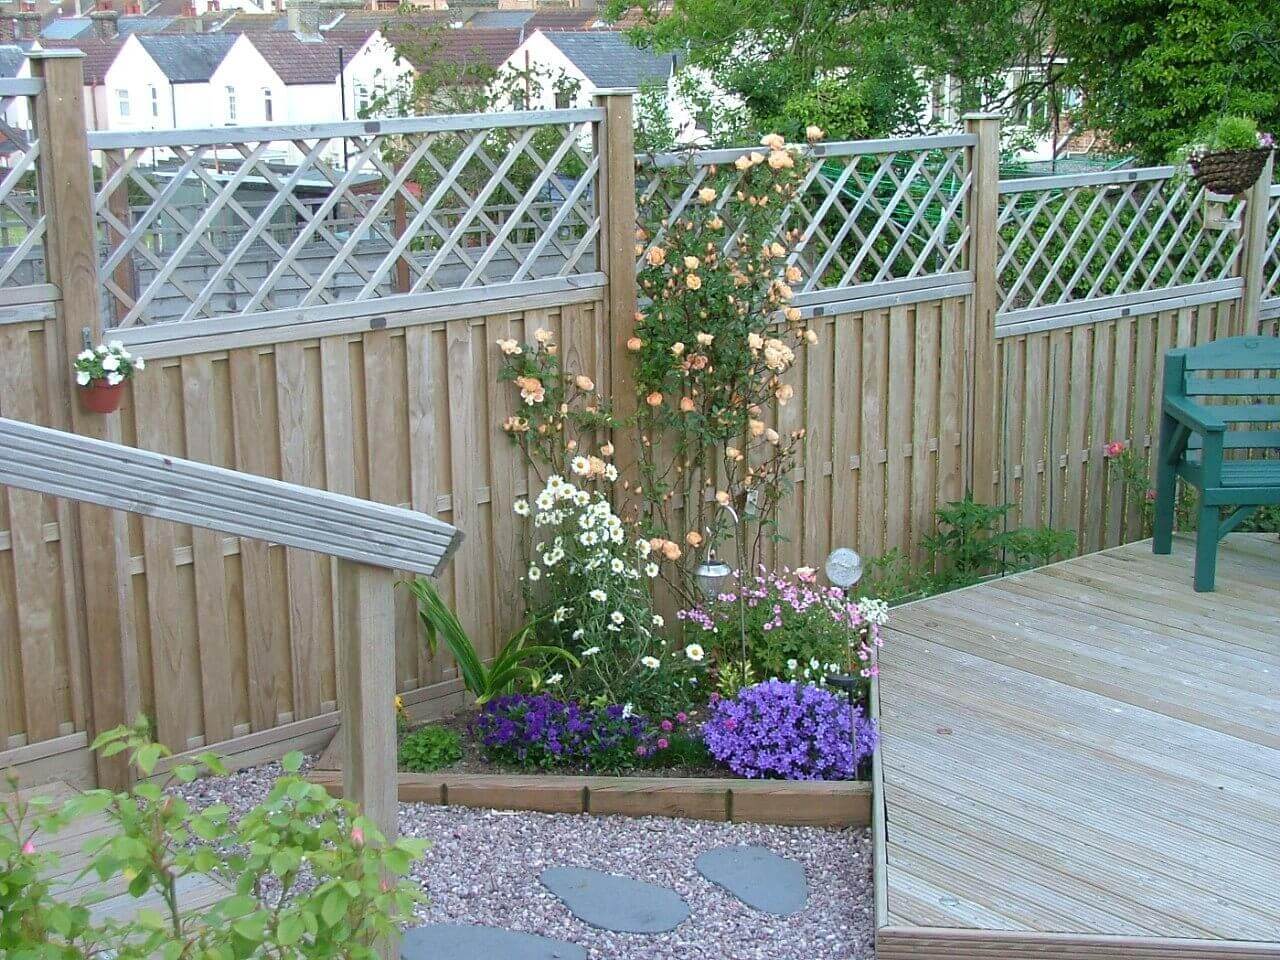 Rose flower bed from landscape timbers and matching fence